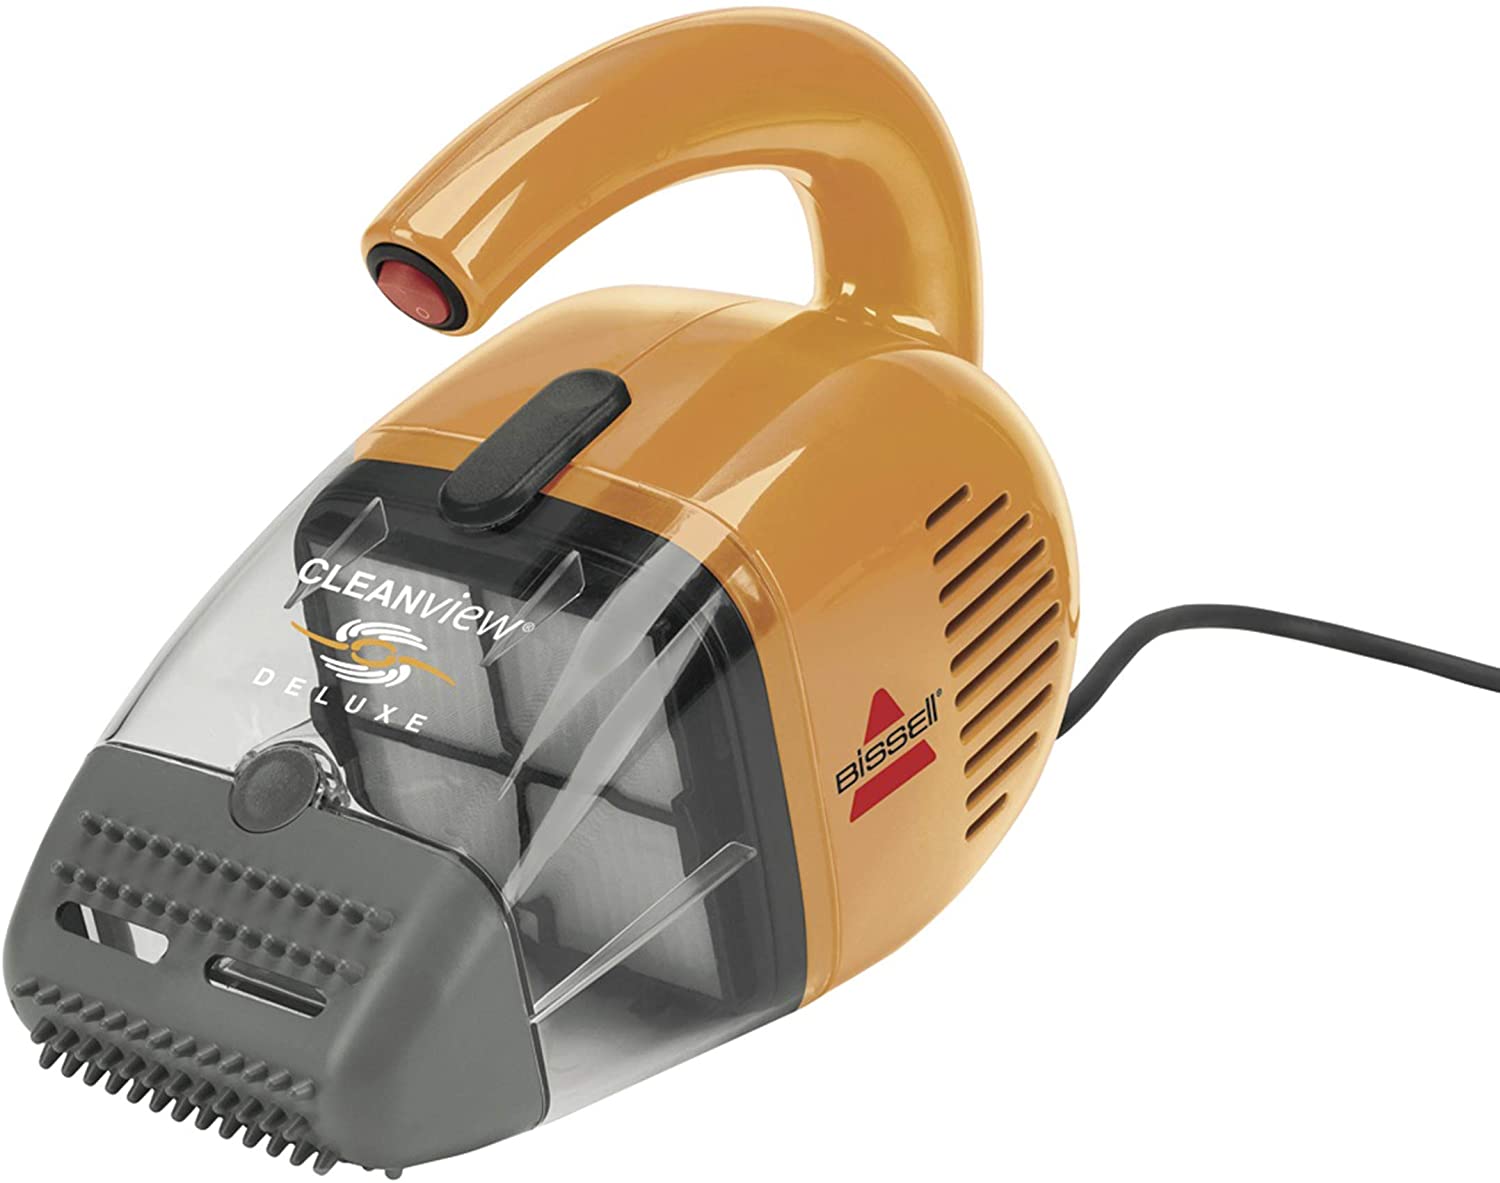 Bissell CleanView Deluxe Hand Vacuum, 47R51 - image 1 of 10